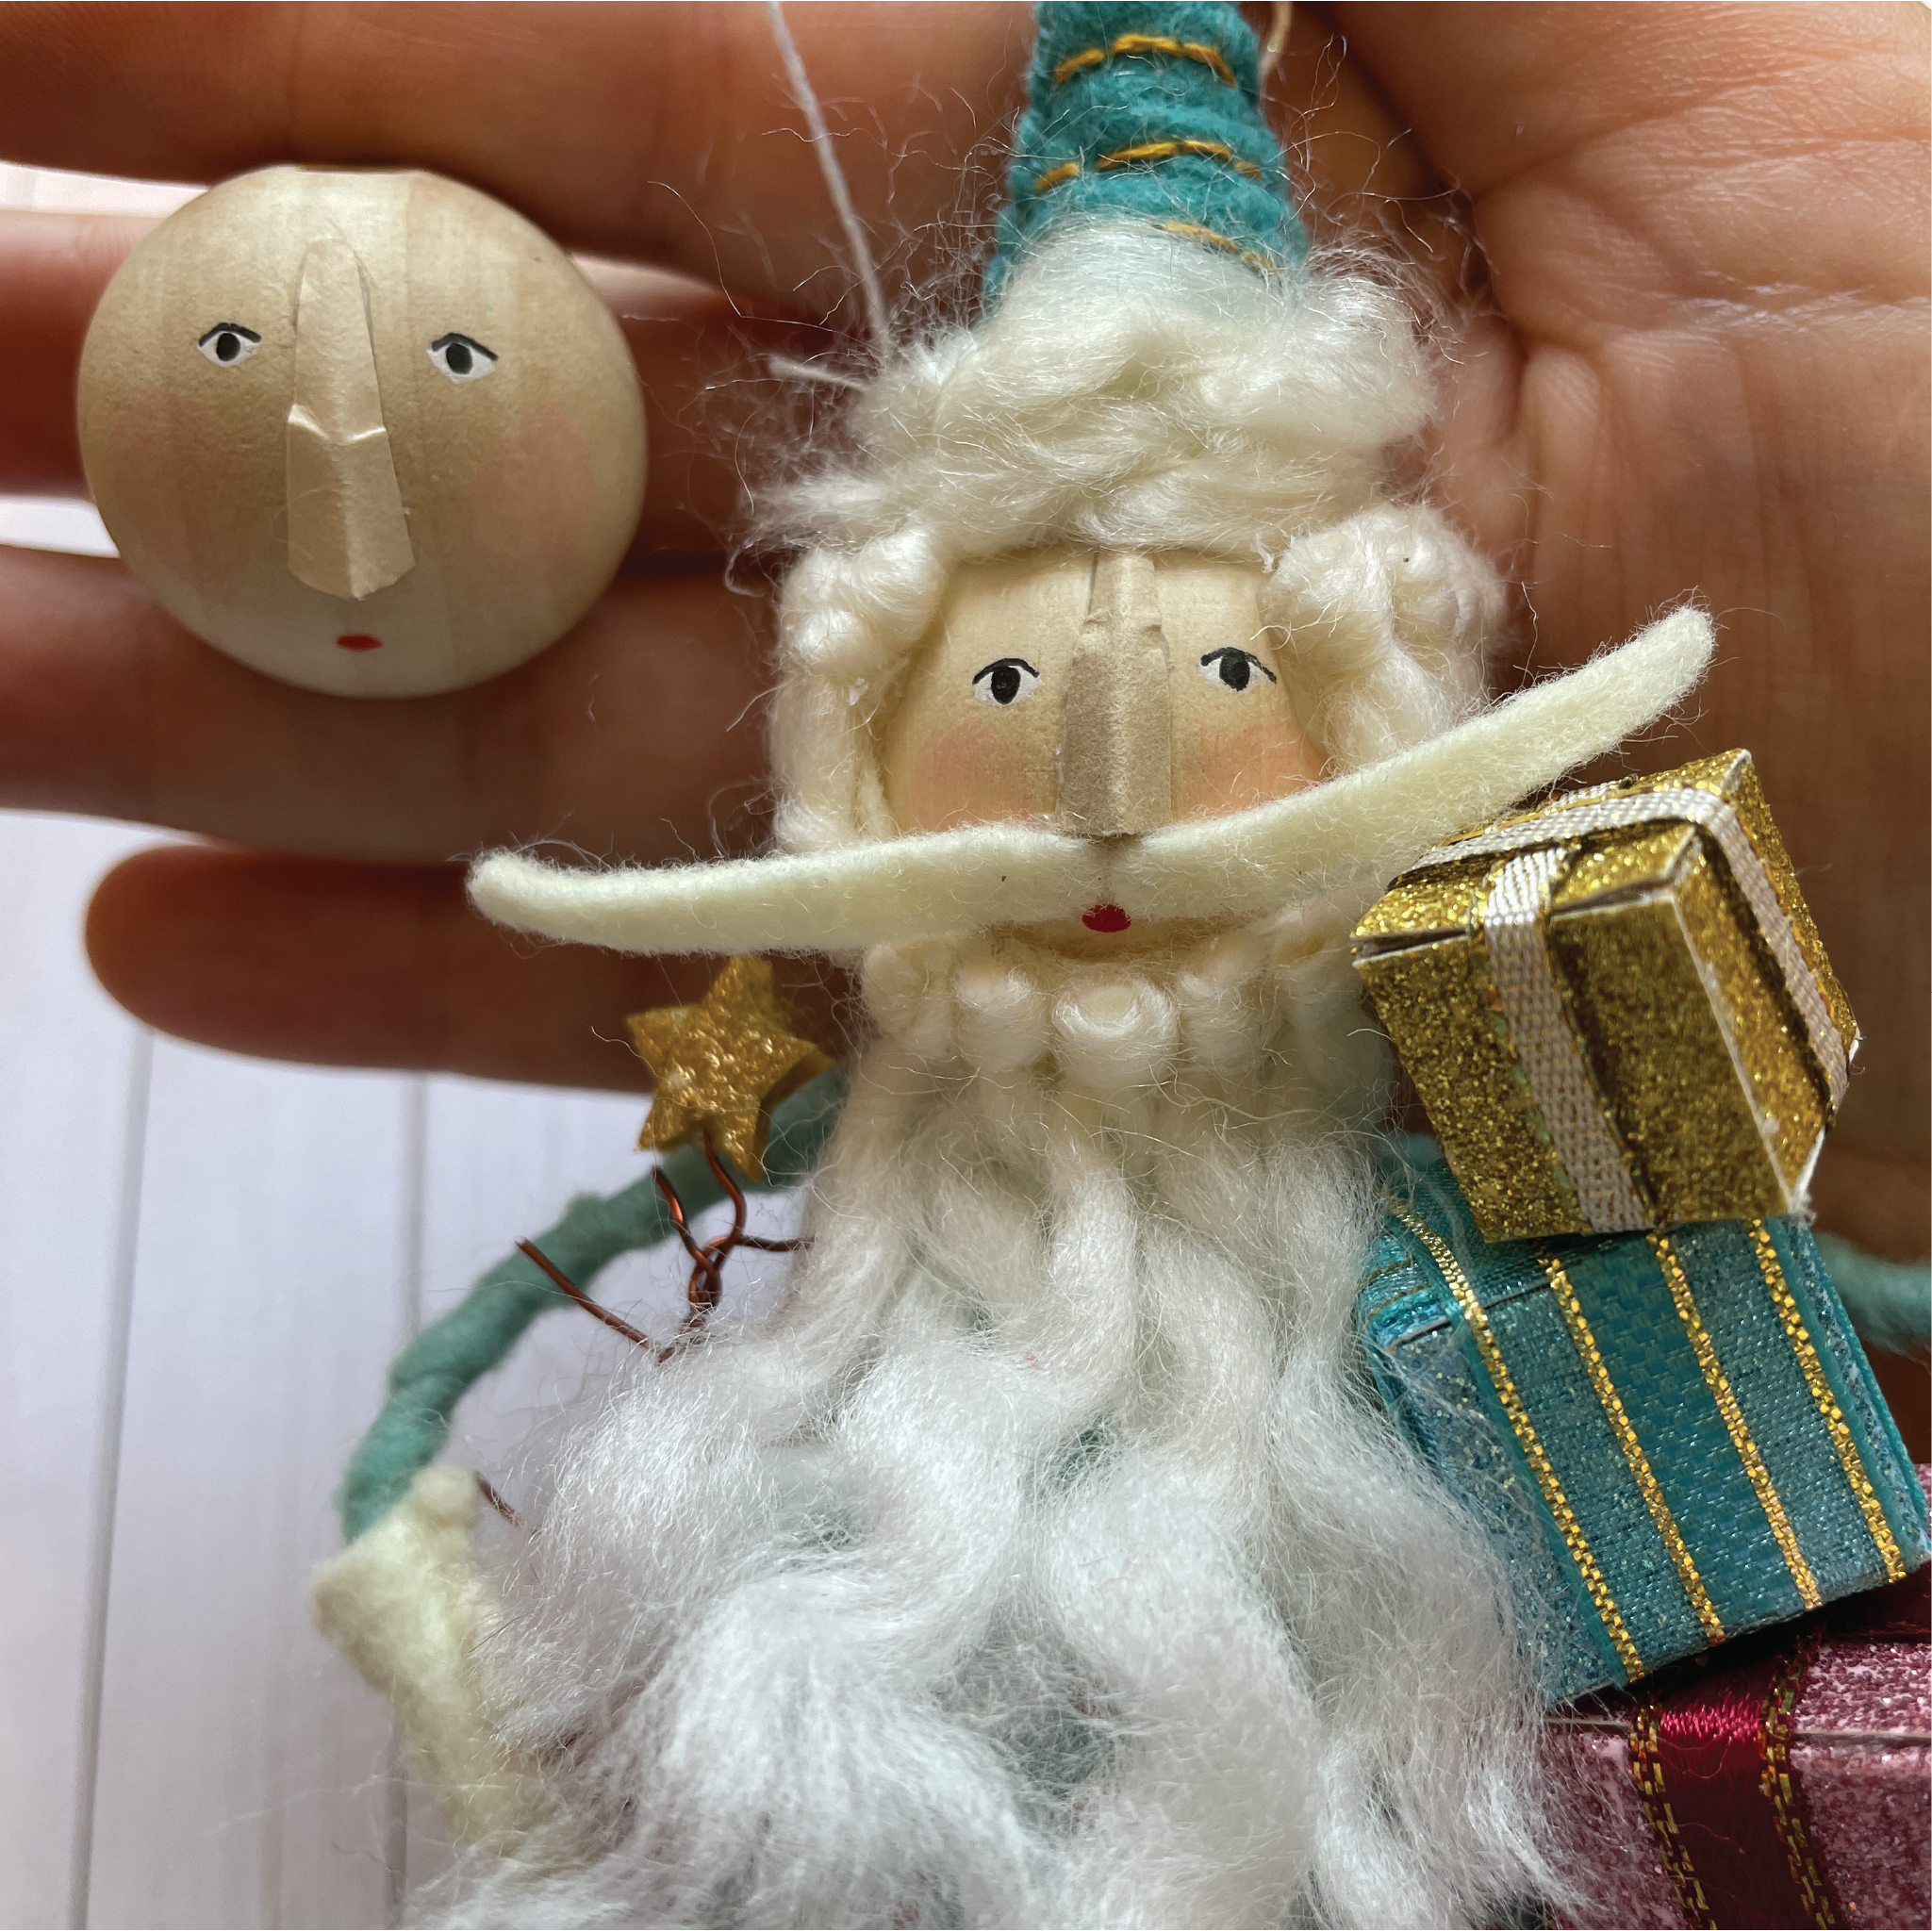 Whimsical Santa Ornament Completed Head